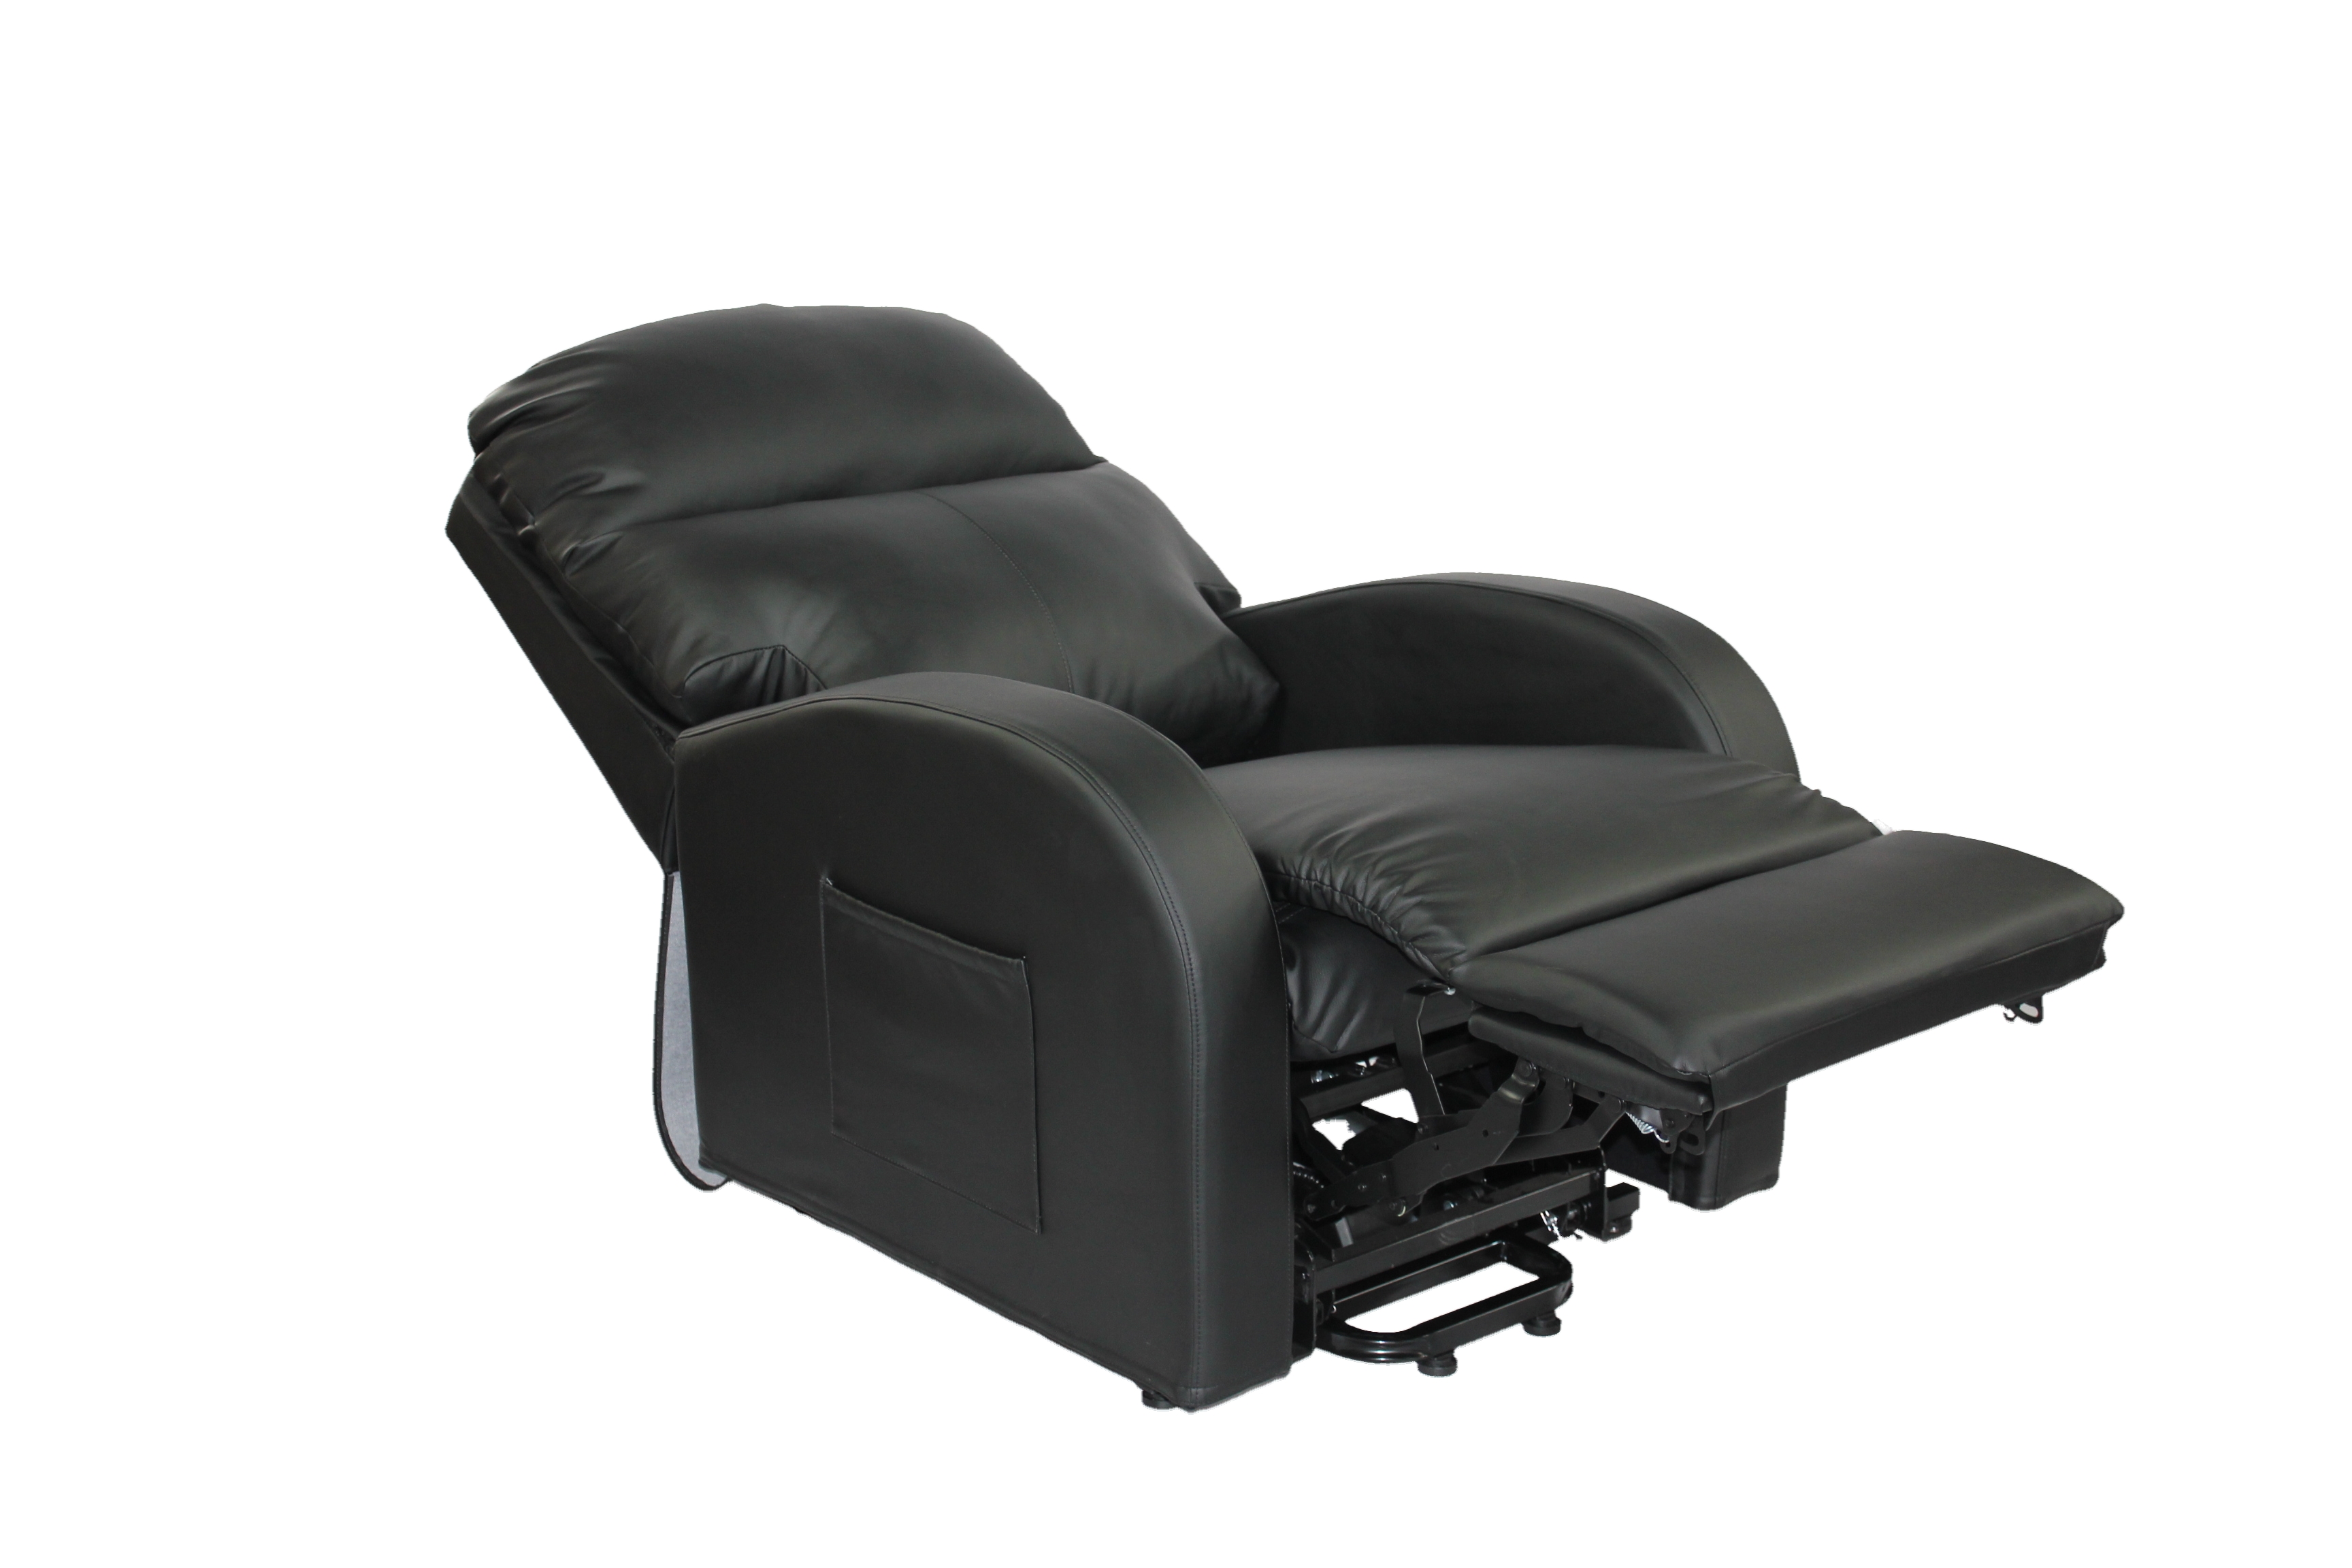 BME 002 Electric Assist Reclining Power Lift Chair with Massage Function for Elderly